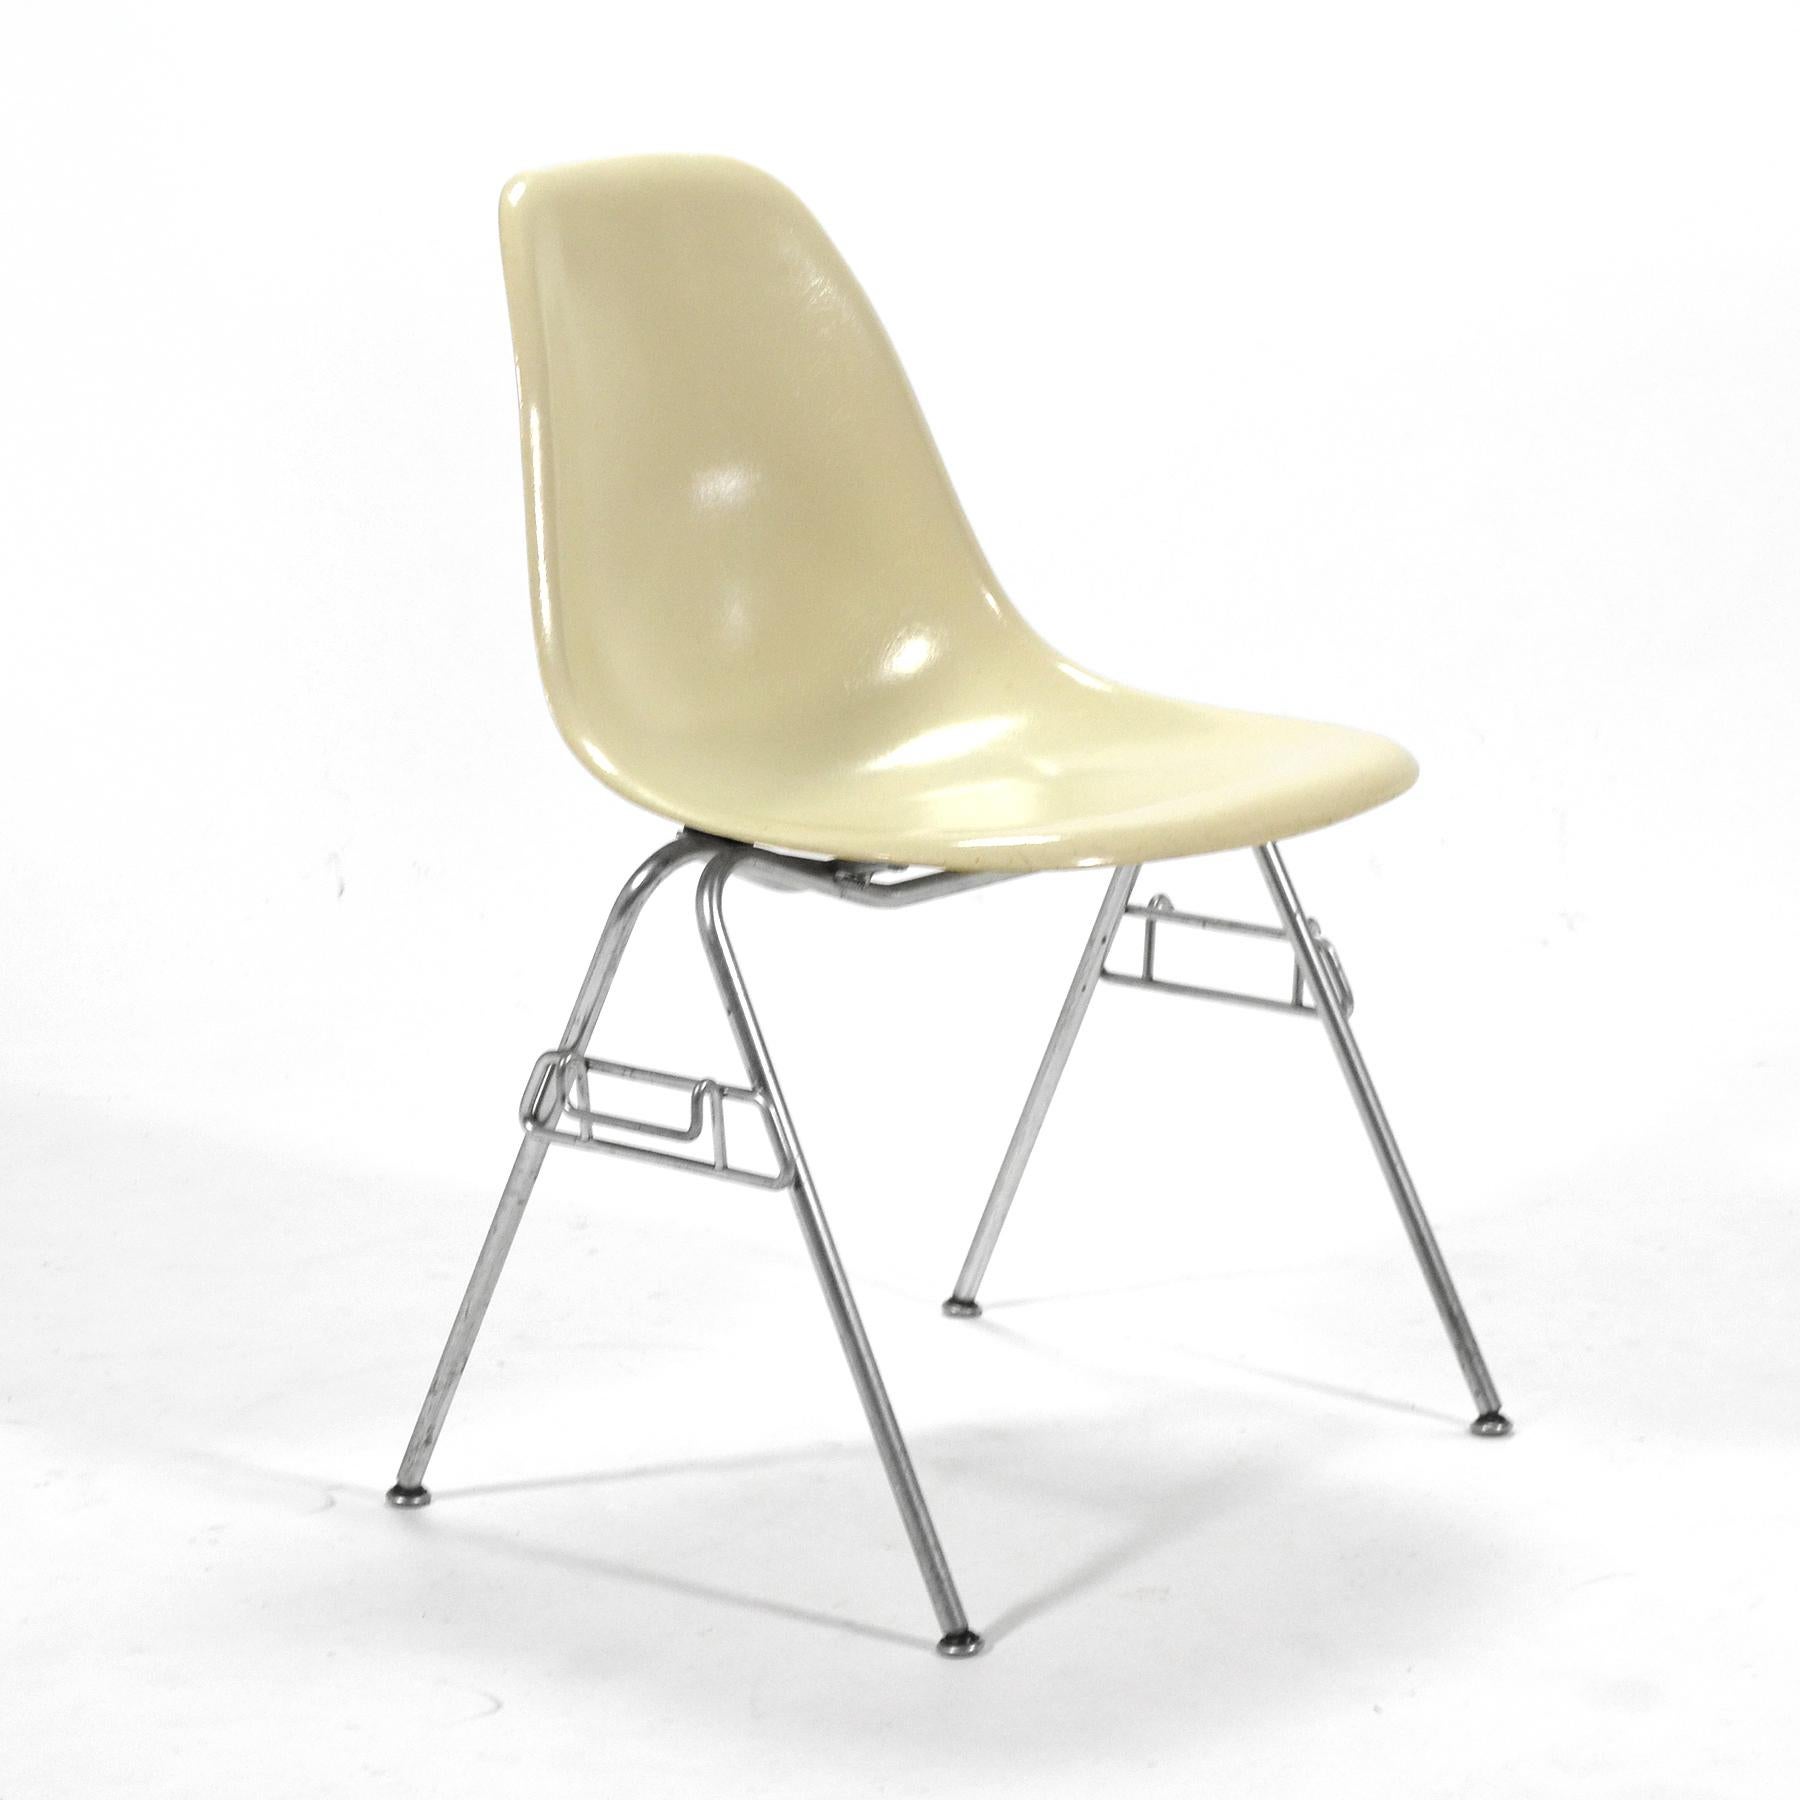 This is a fantastic set of fiberglass stacking side chairs designed by Charles and Ray Eames for Herman Miller. The Eames' important post-war designs in plywood and fiberglass are well documented and are represented in every major museum's